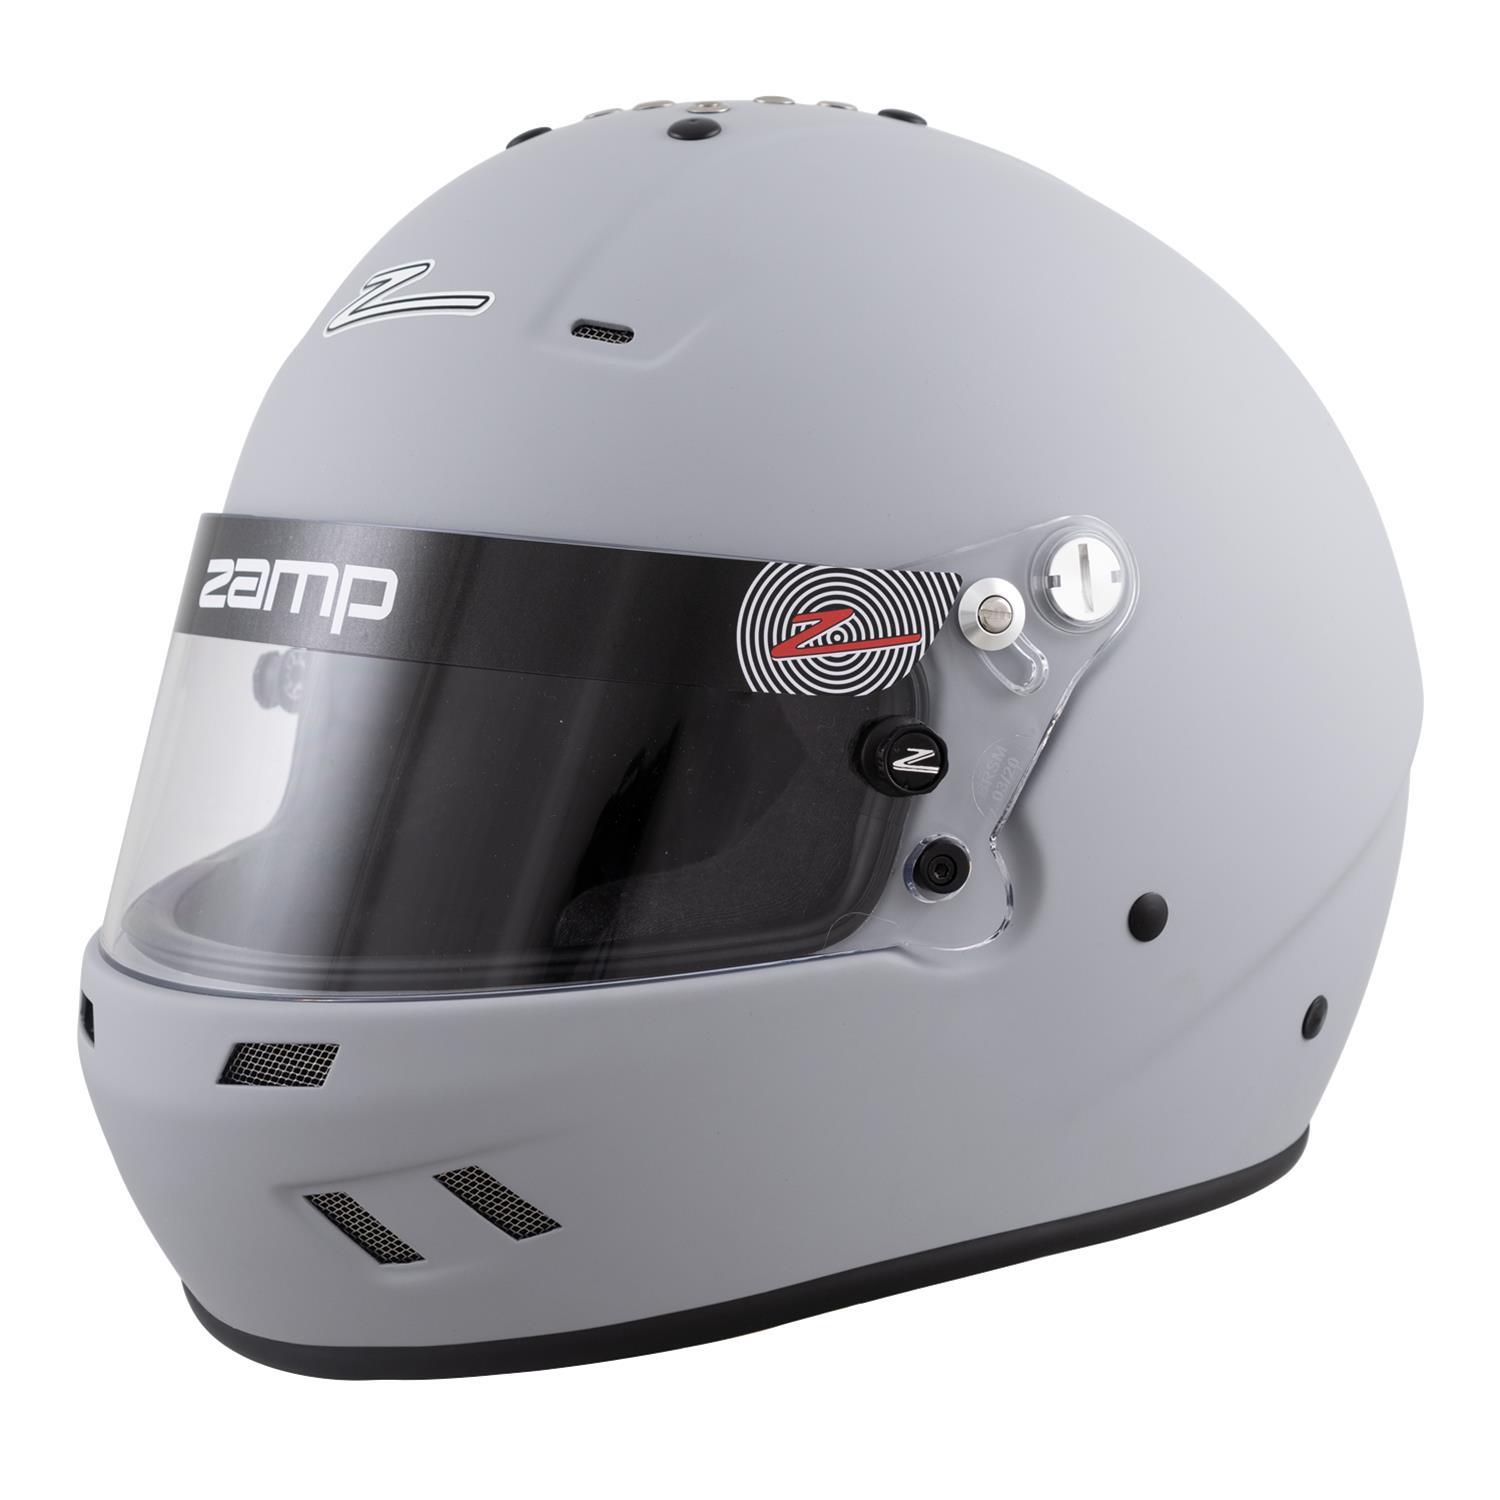 Zamp Racing H77215FXL Helmet, RZ-59, Snell SA2020, Head and Neck Support Ready, Flat Gray, X-Large, Each